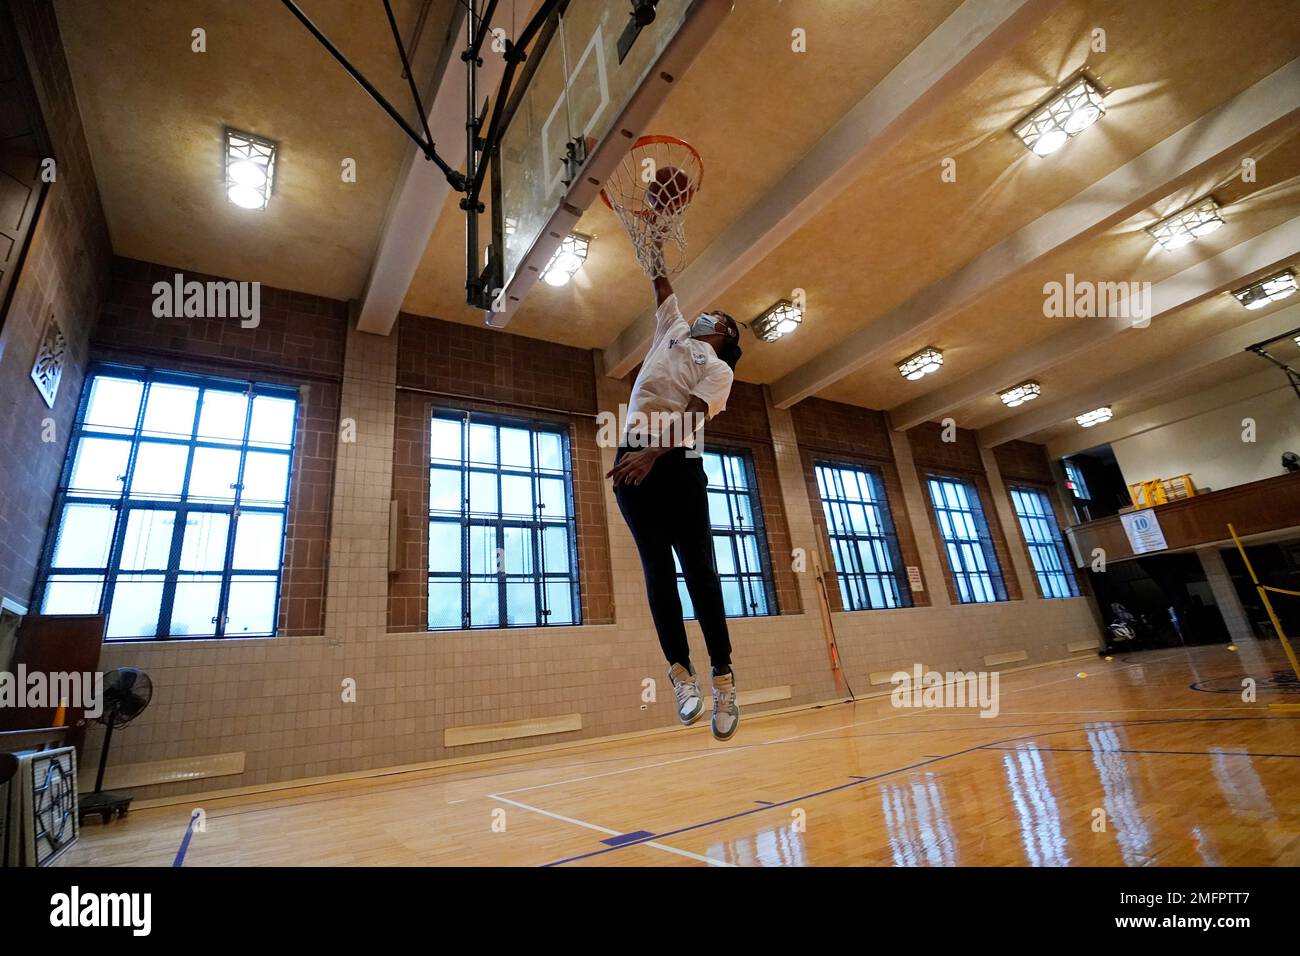 Kenny Scottborough, 19, goes up for a shot in an empty gymnasium at West  Brooklyn Community High School, Thursday, Oct. 29, 2020, in New York. The  high school is a "transfer school,"